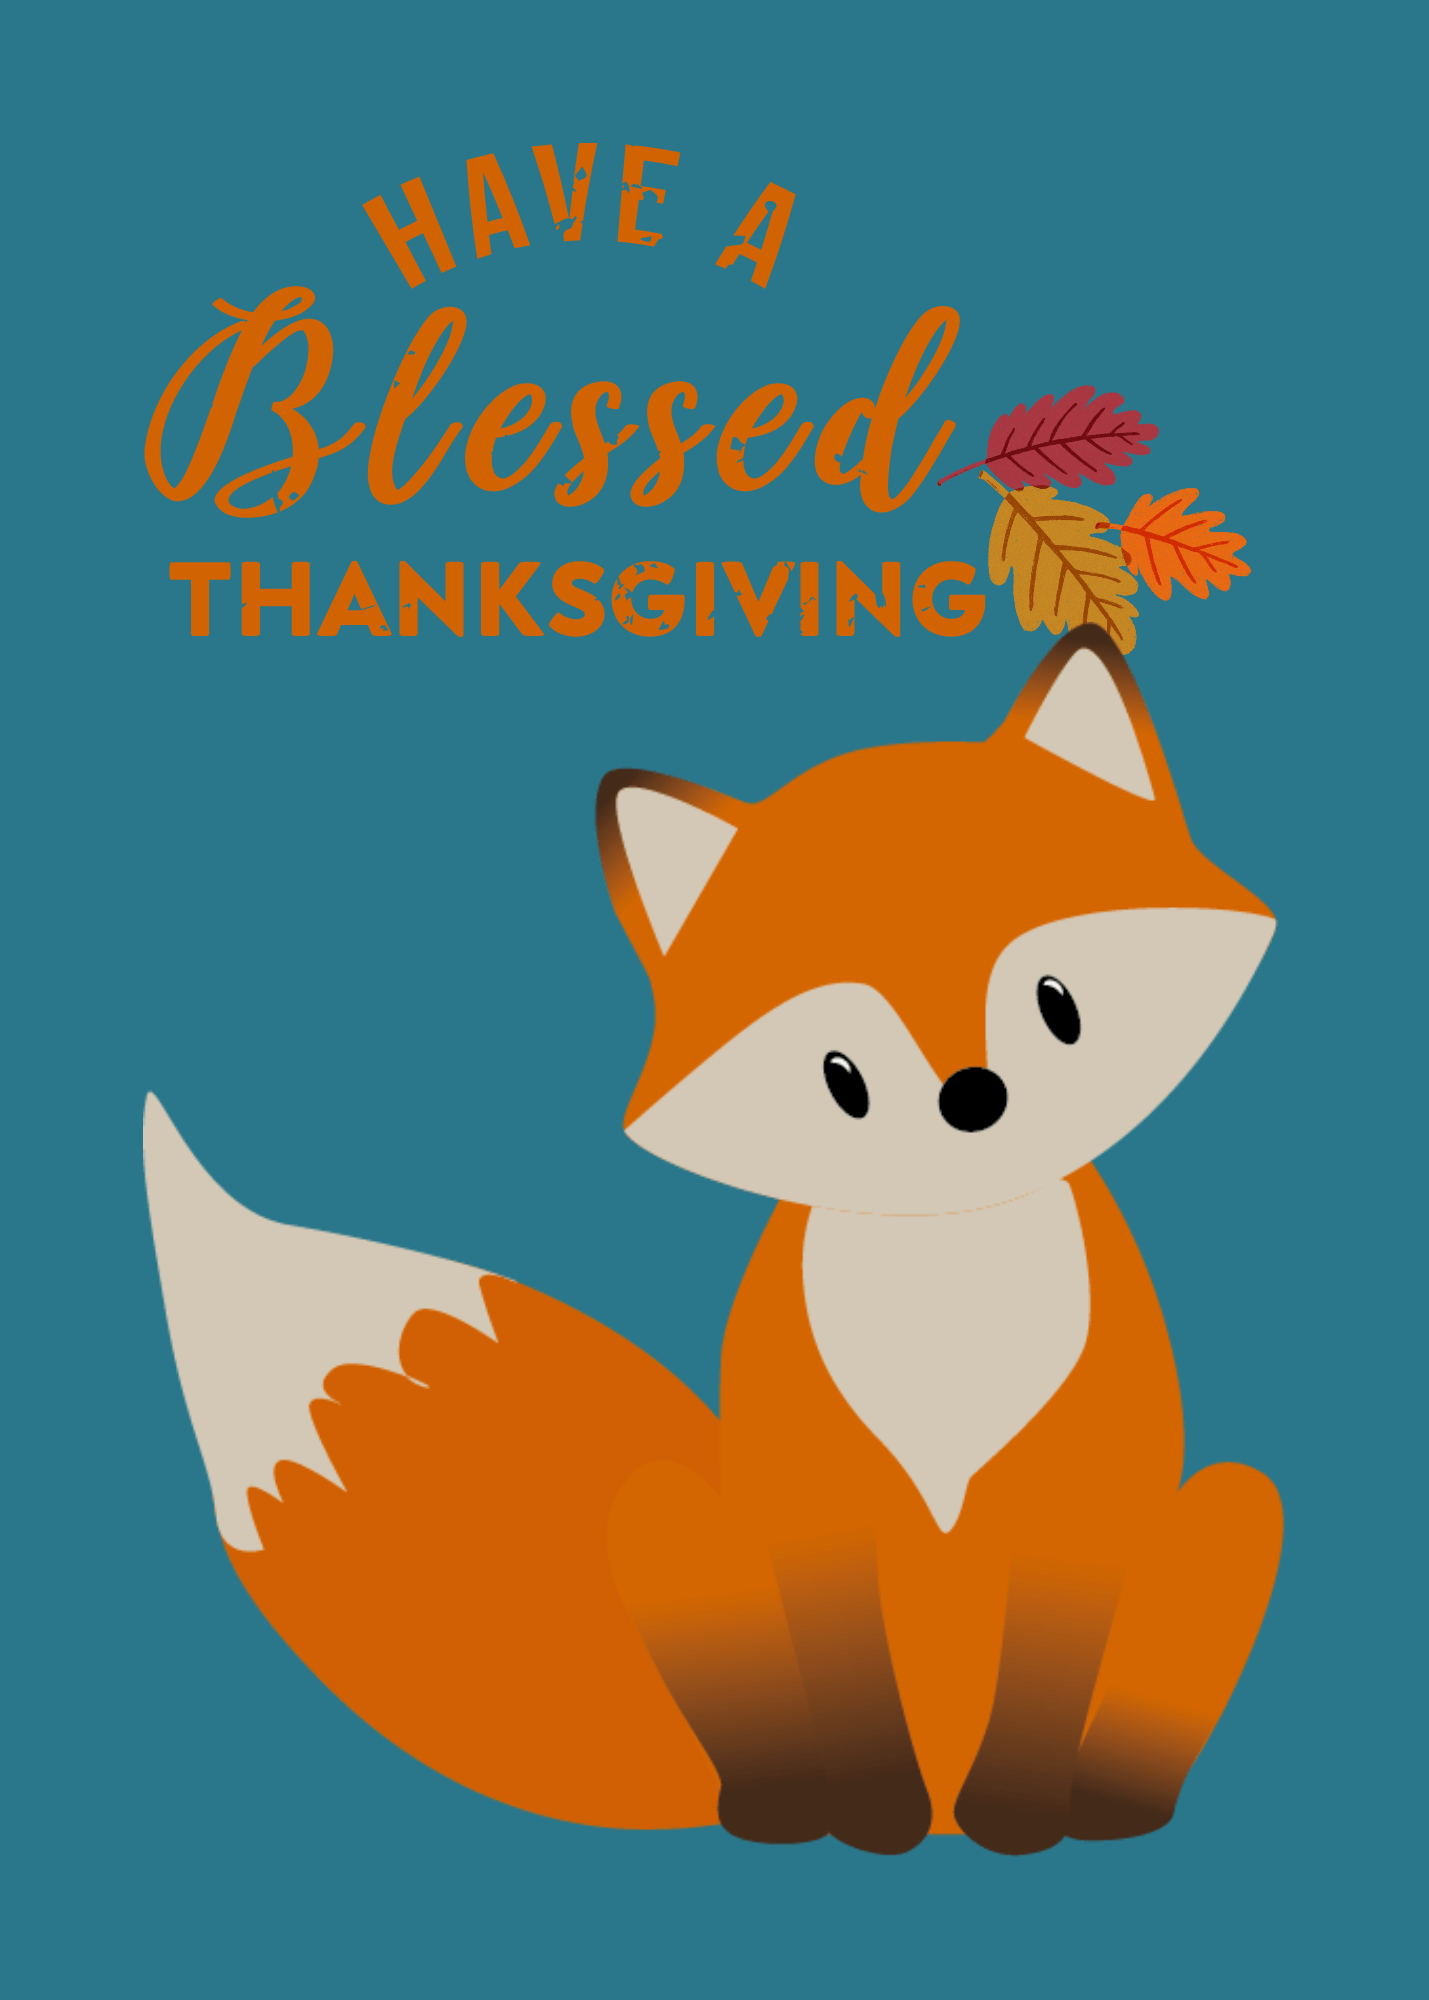 Have a blessed Thanksgriving